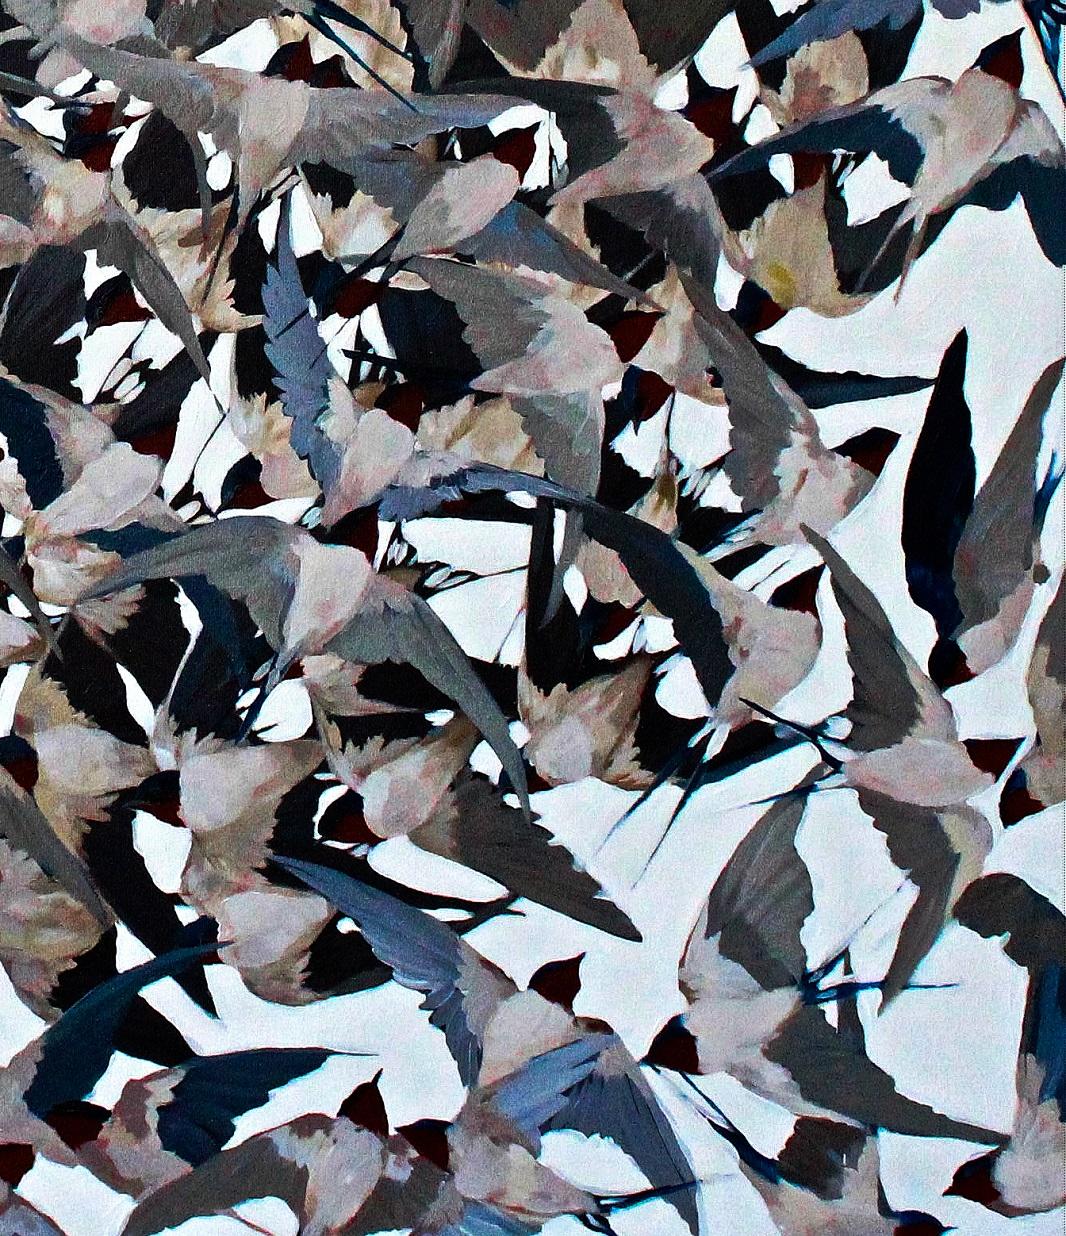 Birds Flying- Contemporary painting, Acrylic on Canvas, 21st Century - Painting by Kirsty May Hall